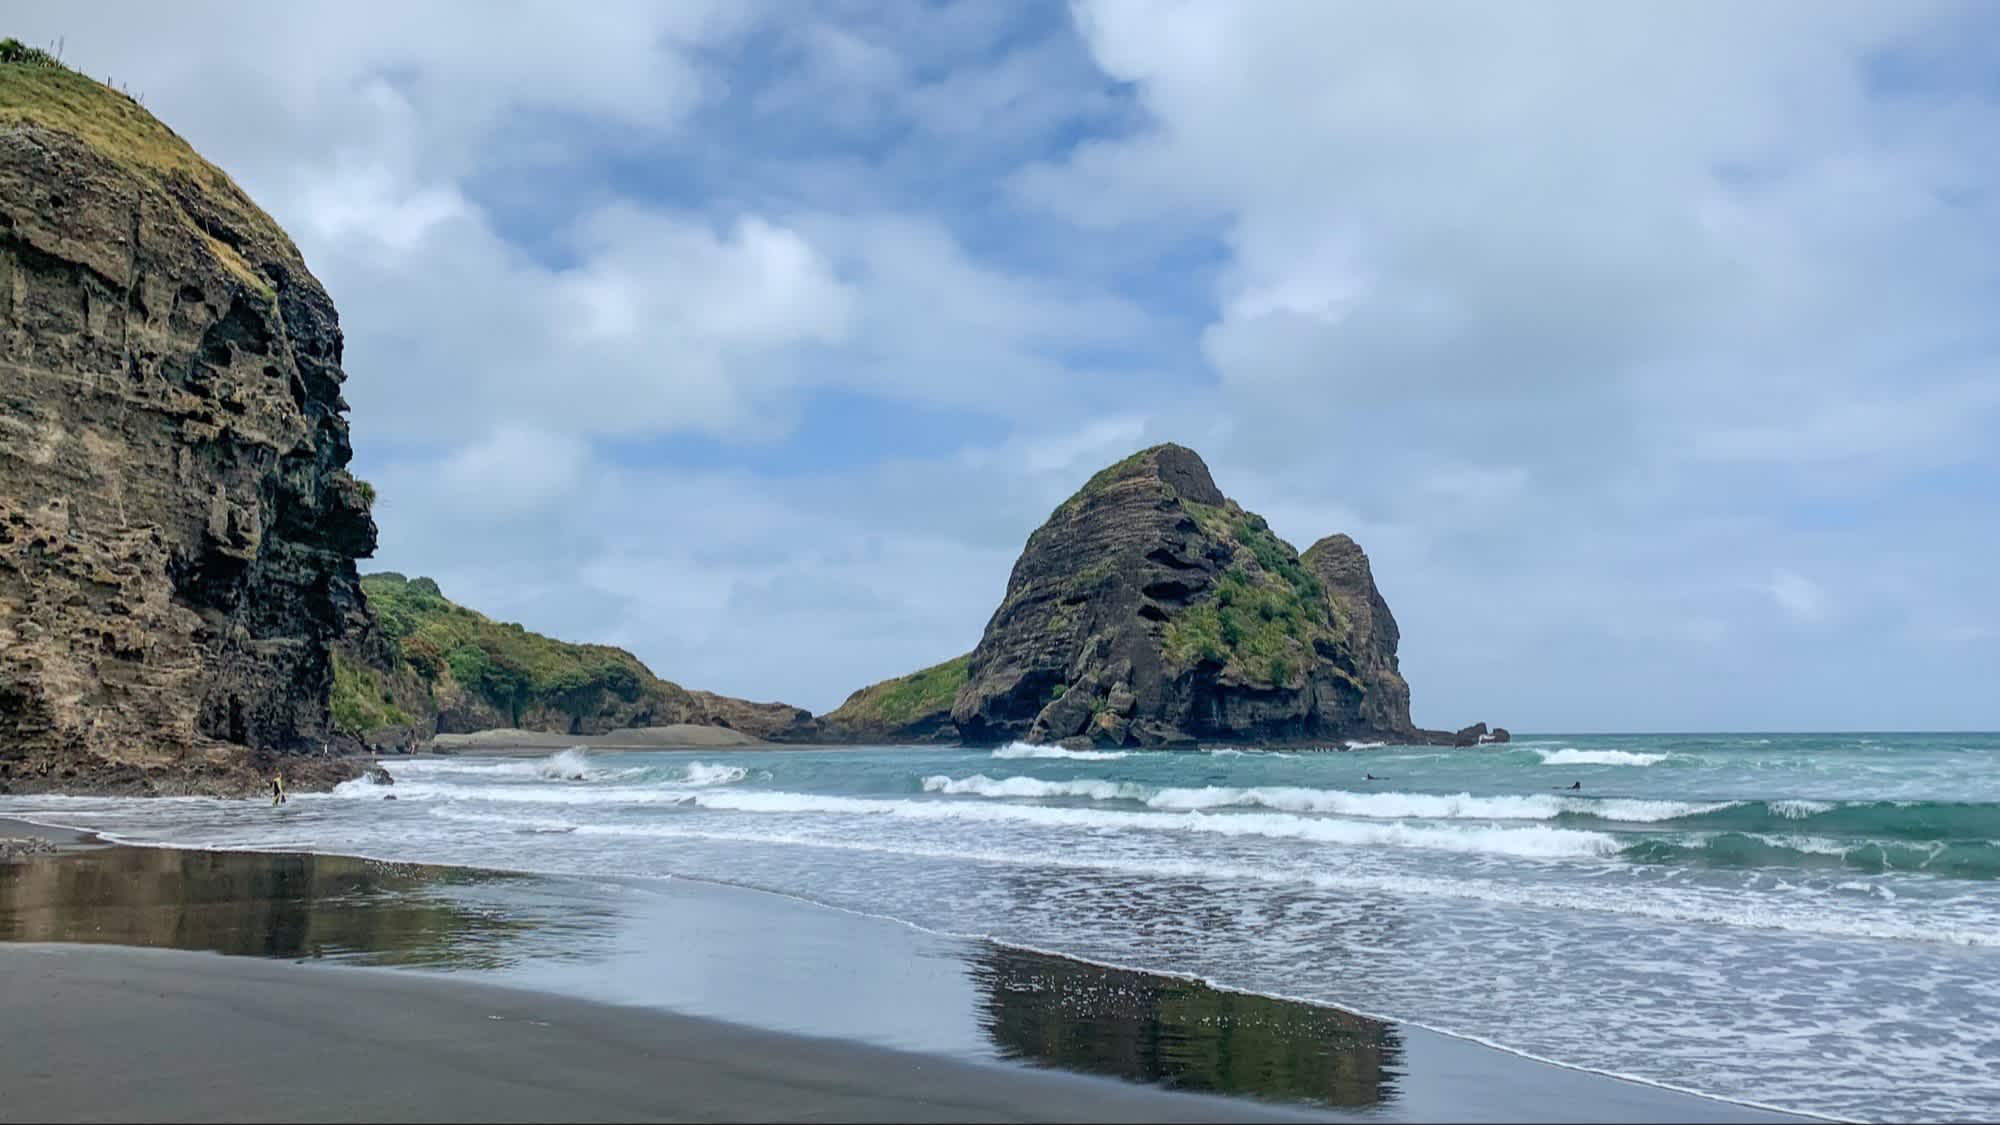 Black sand, cliffs in the water of Piha Beach in Auckland, New Zealand